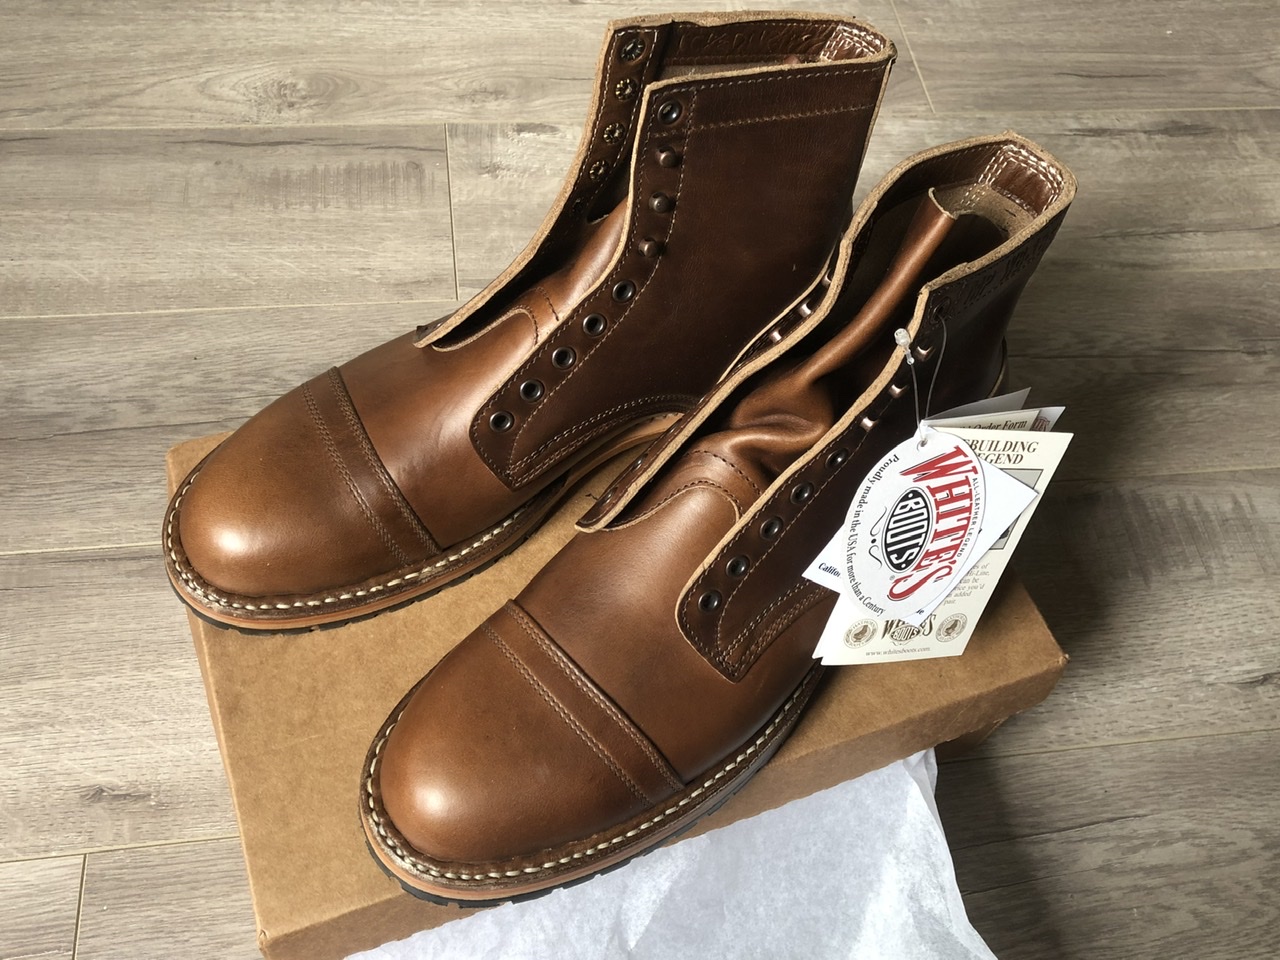 White's Boots - New - British Tan CXL - 10.5D | The Fedora Lounge